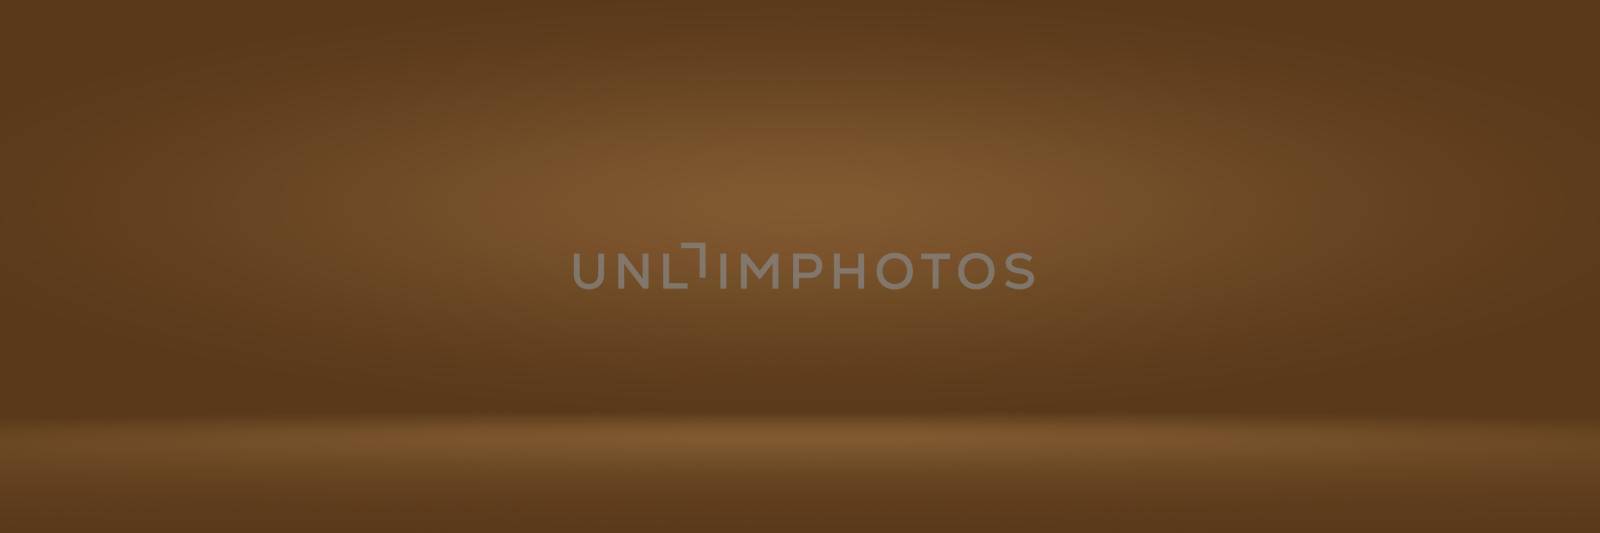 Abstract luxury plain dark brown and brown wallpaper background used for vignette frames, presentations, studio backgrounds, boards, laminate for furniture and floor tiles. by Benzoix